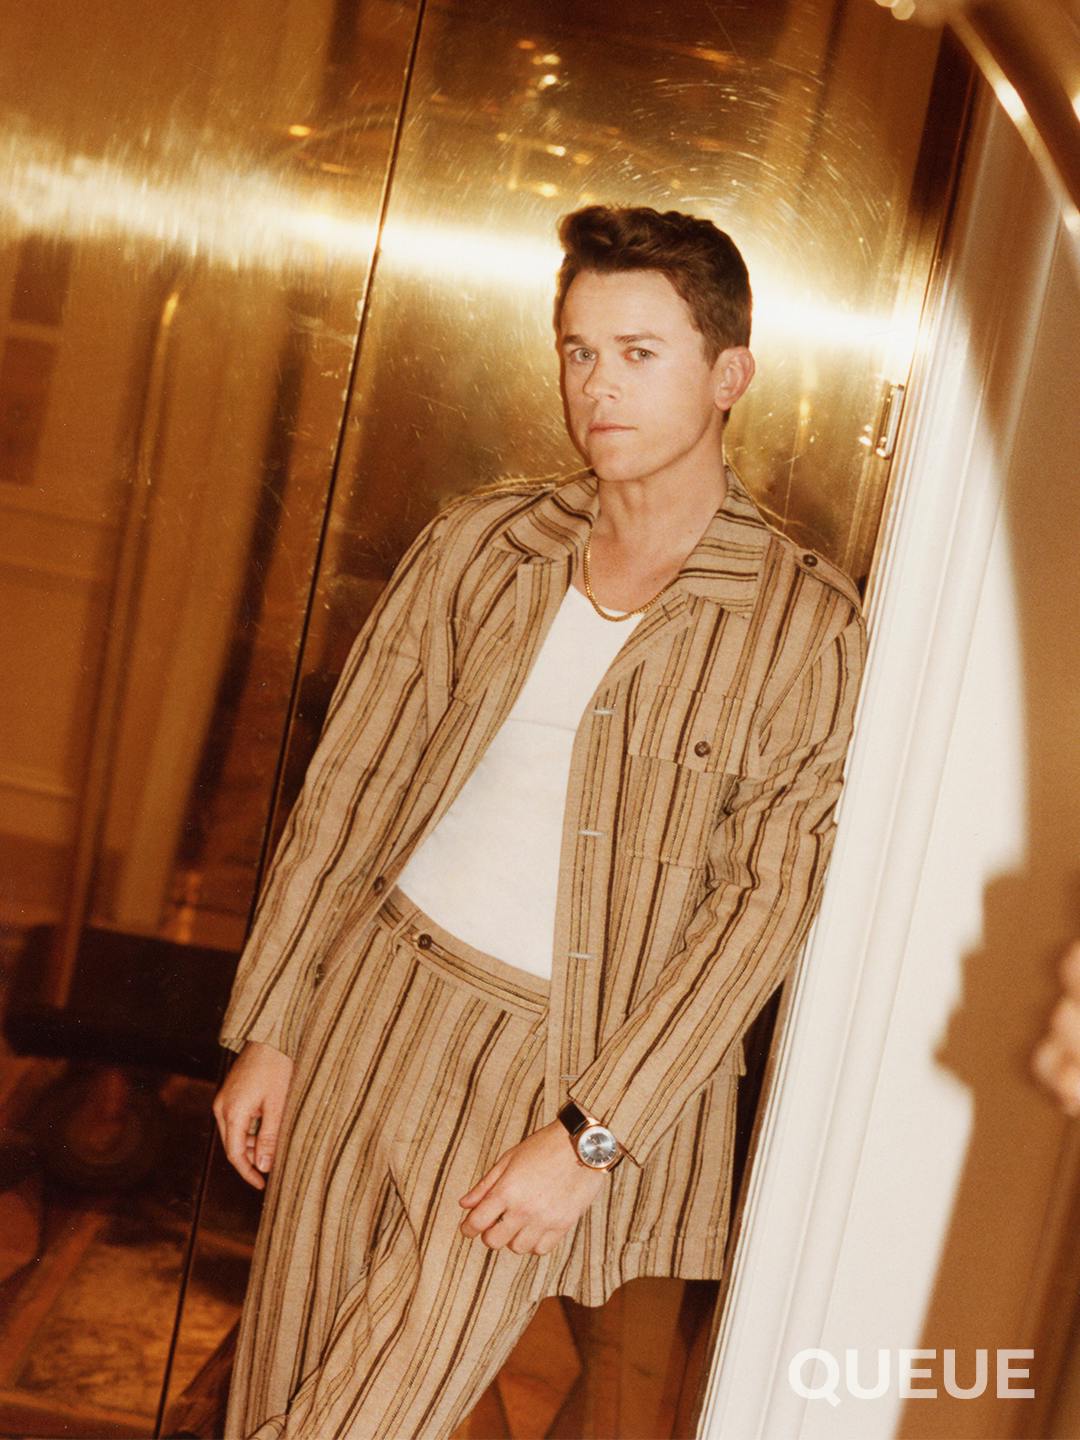 John Owen Lowe wears a striped brown suit over a white tank top and leans against white molding.